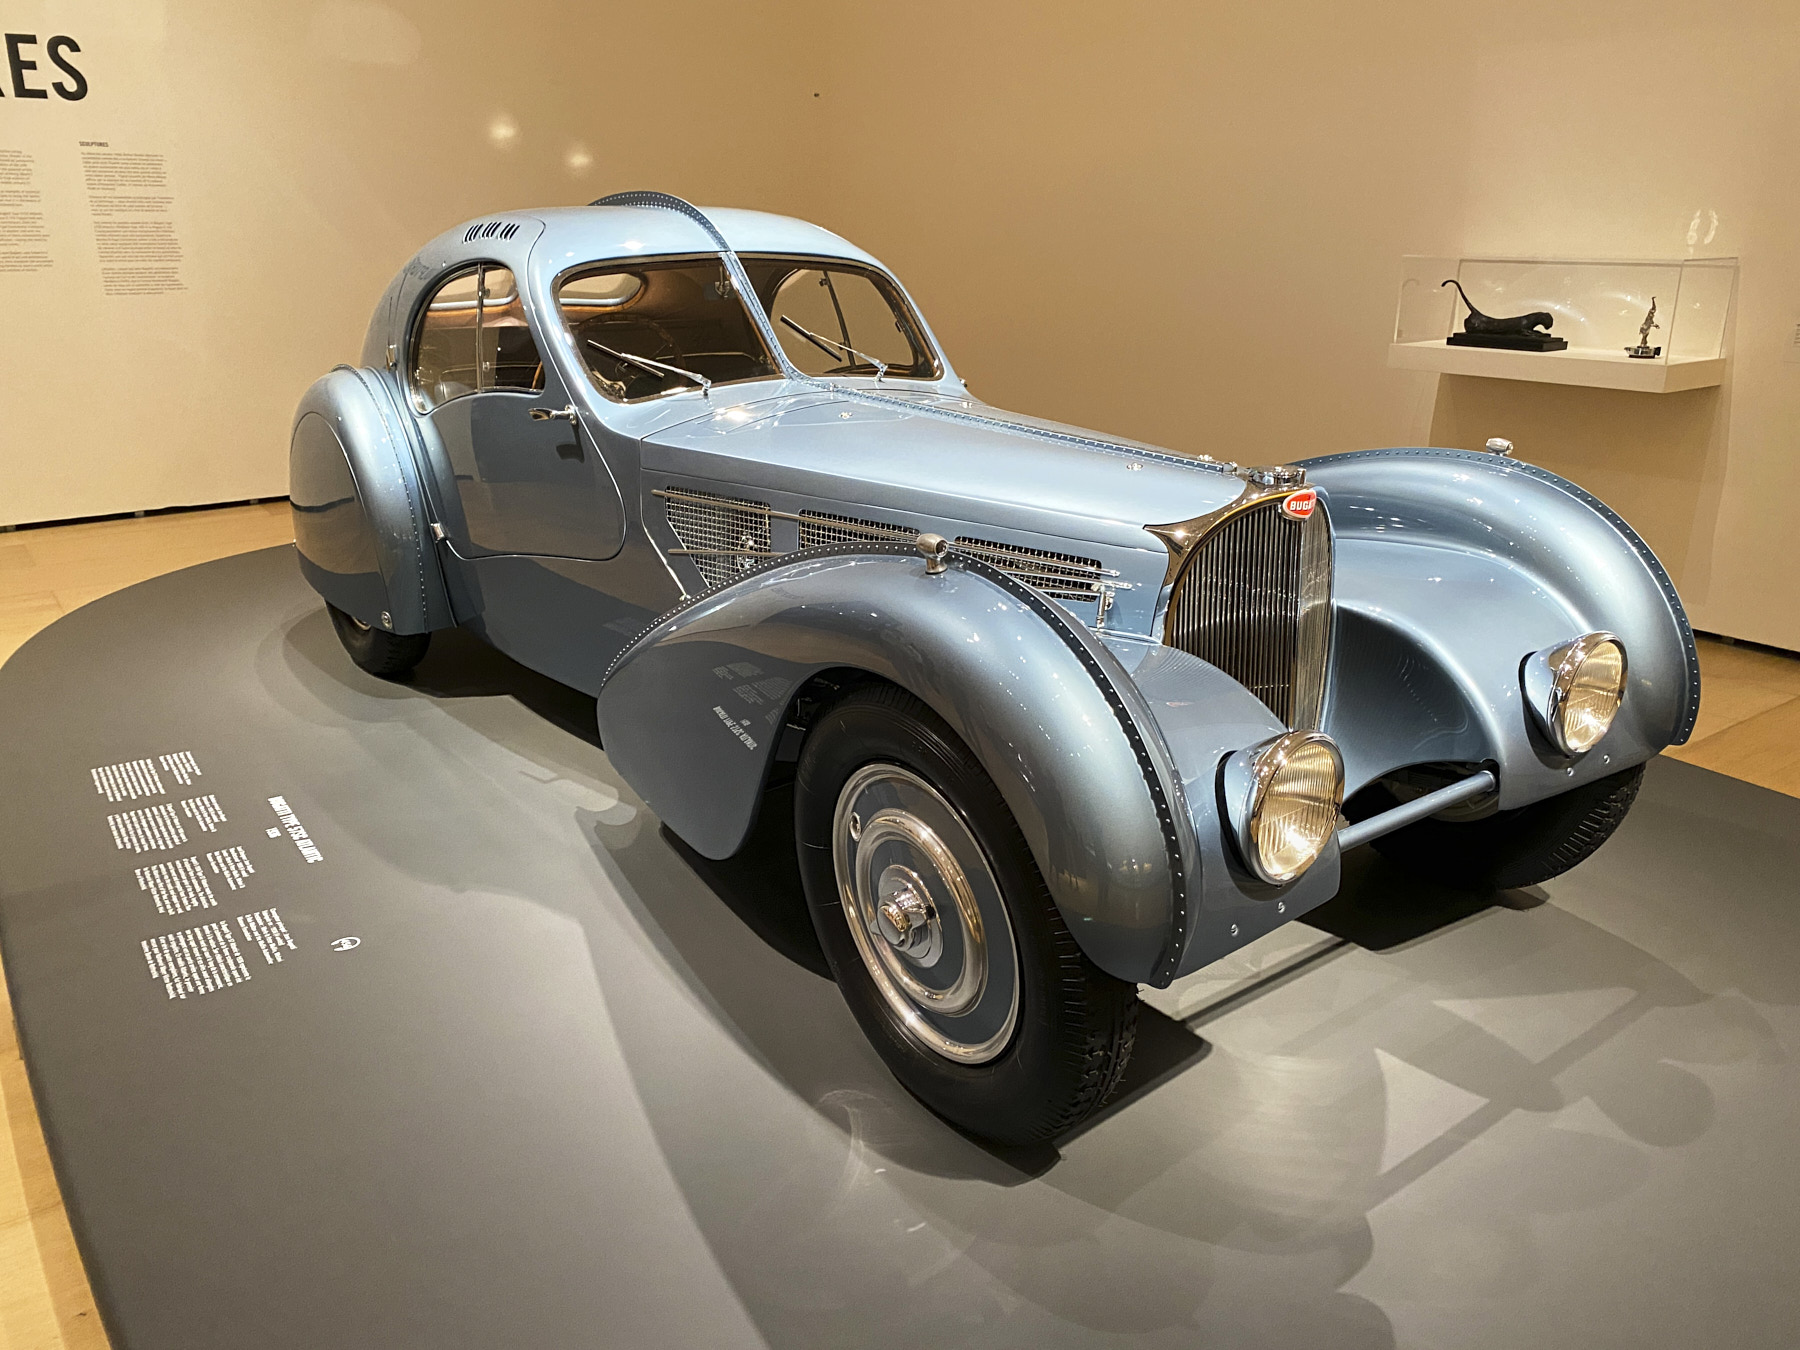 Classic Car exhibition at Guggenheim